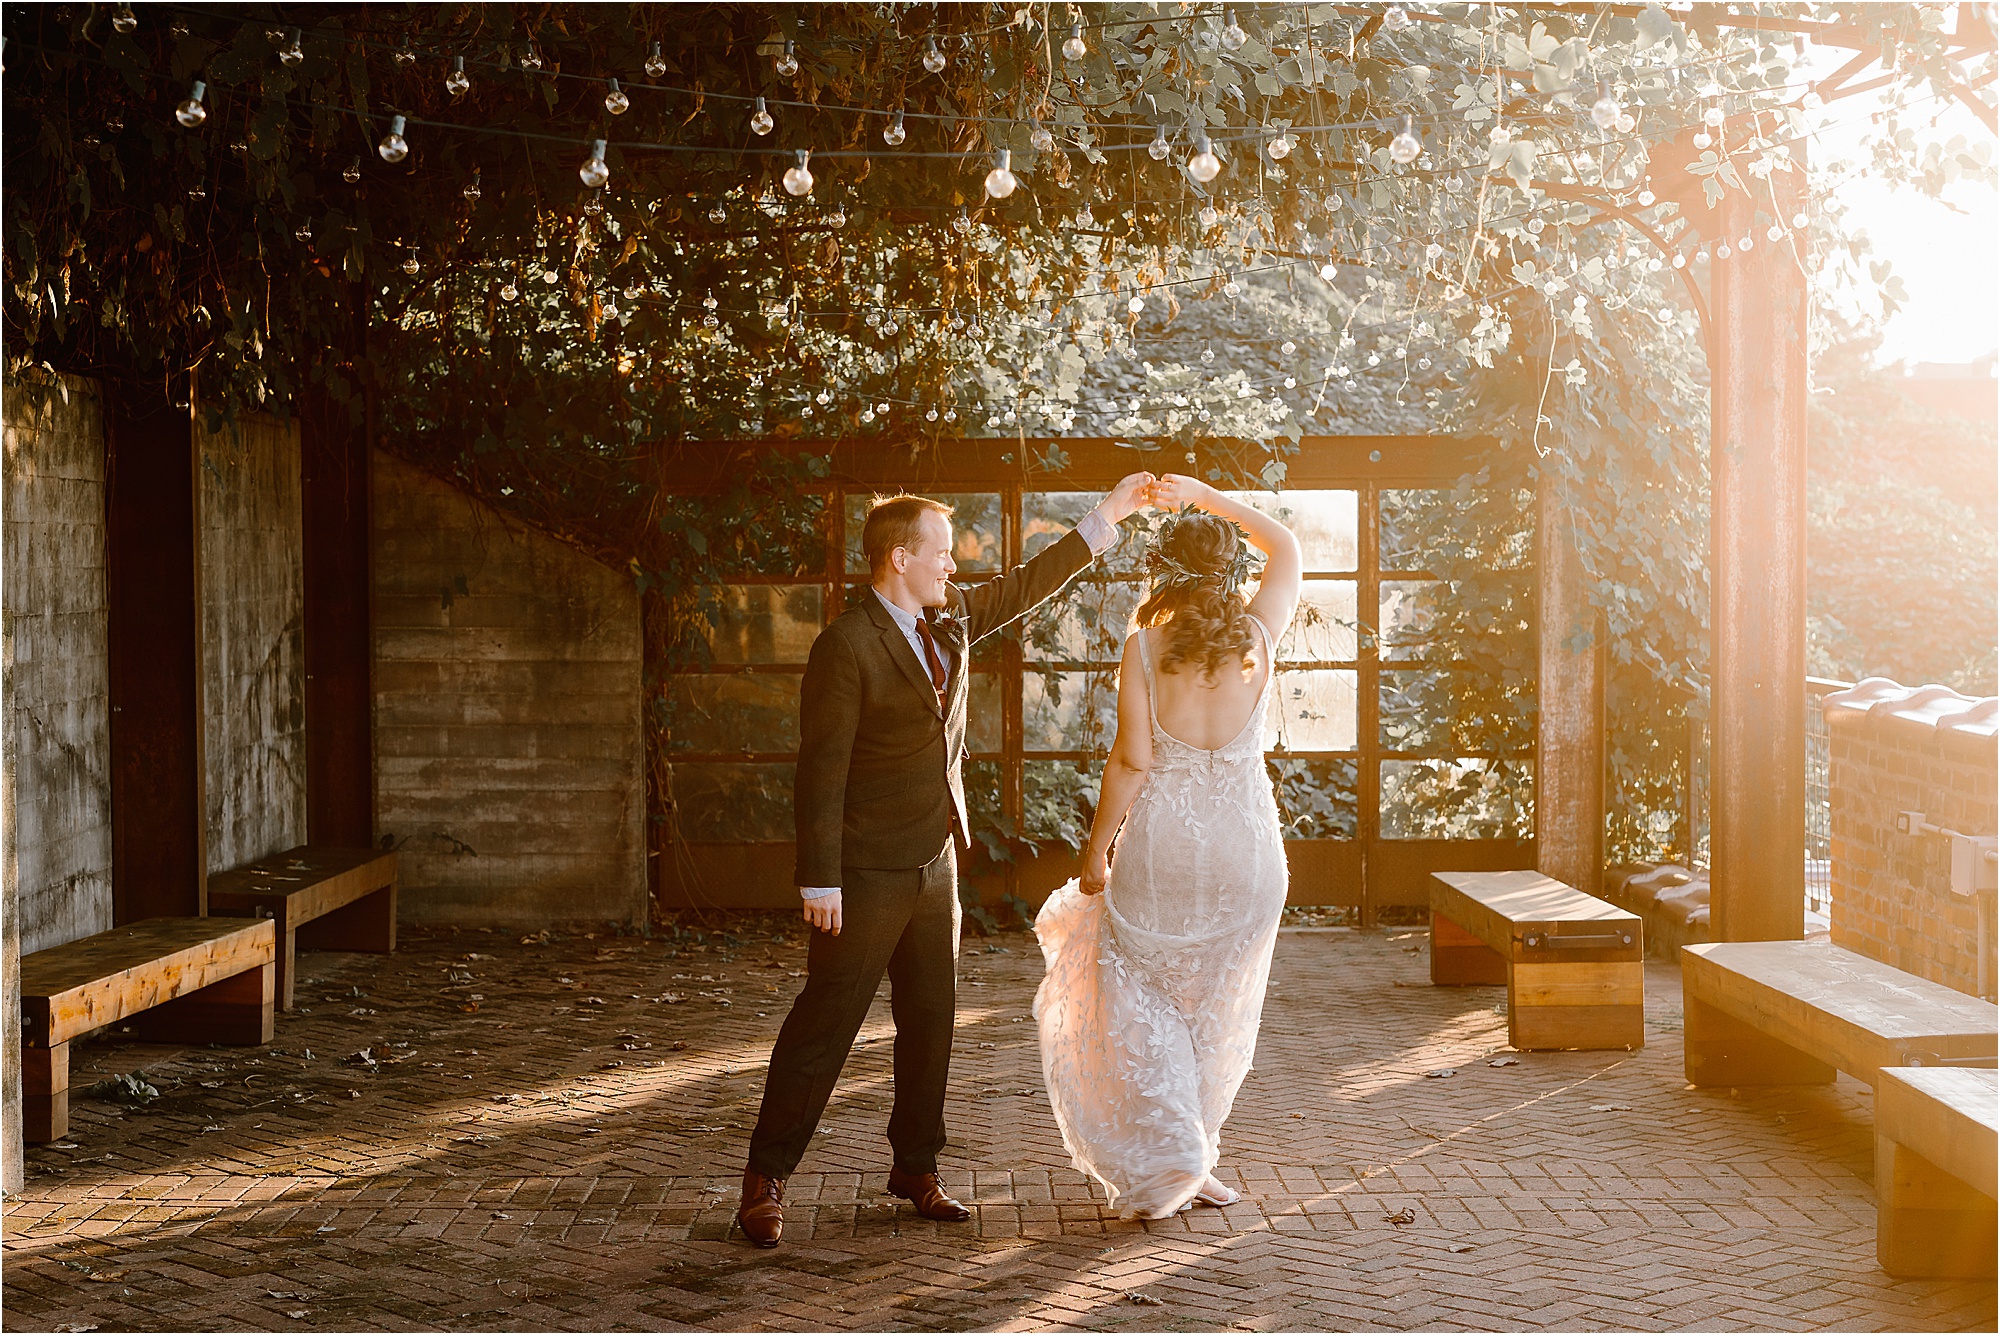 groom twirls bride at sunset on patio with hanging vines 